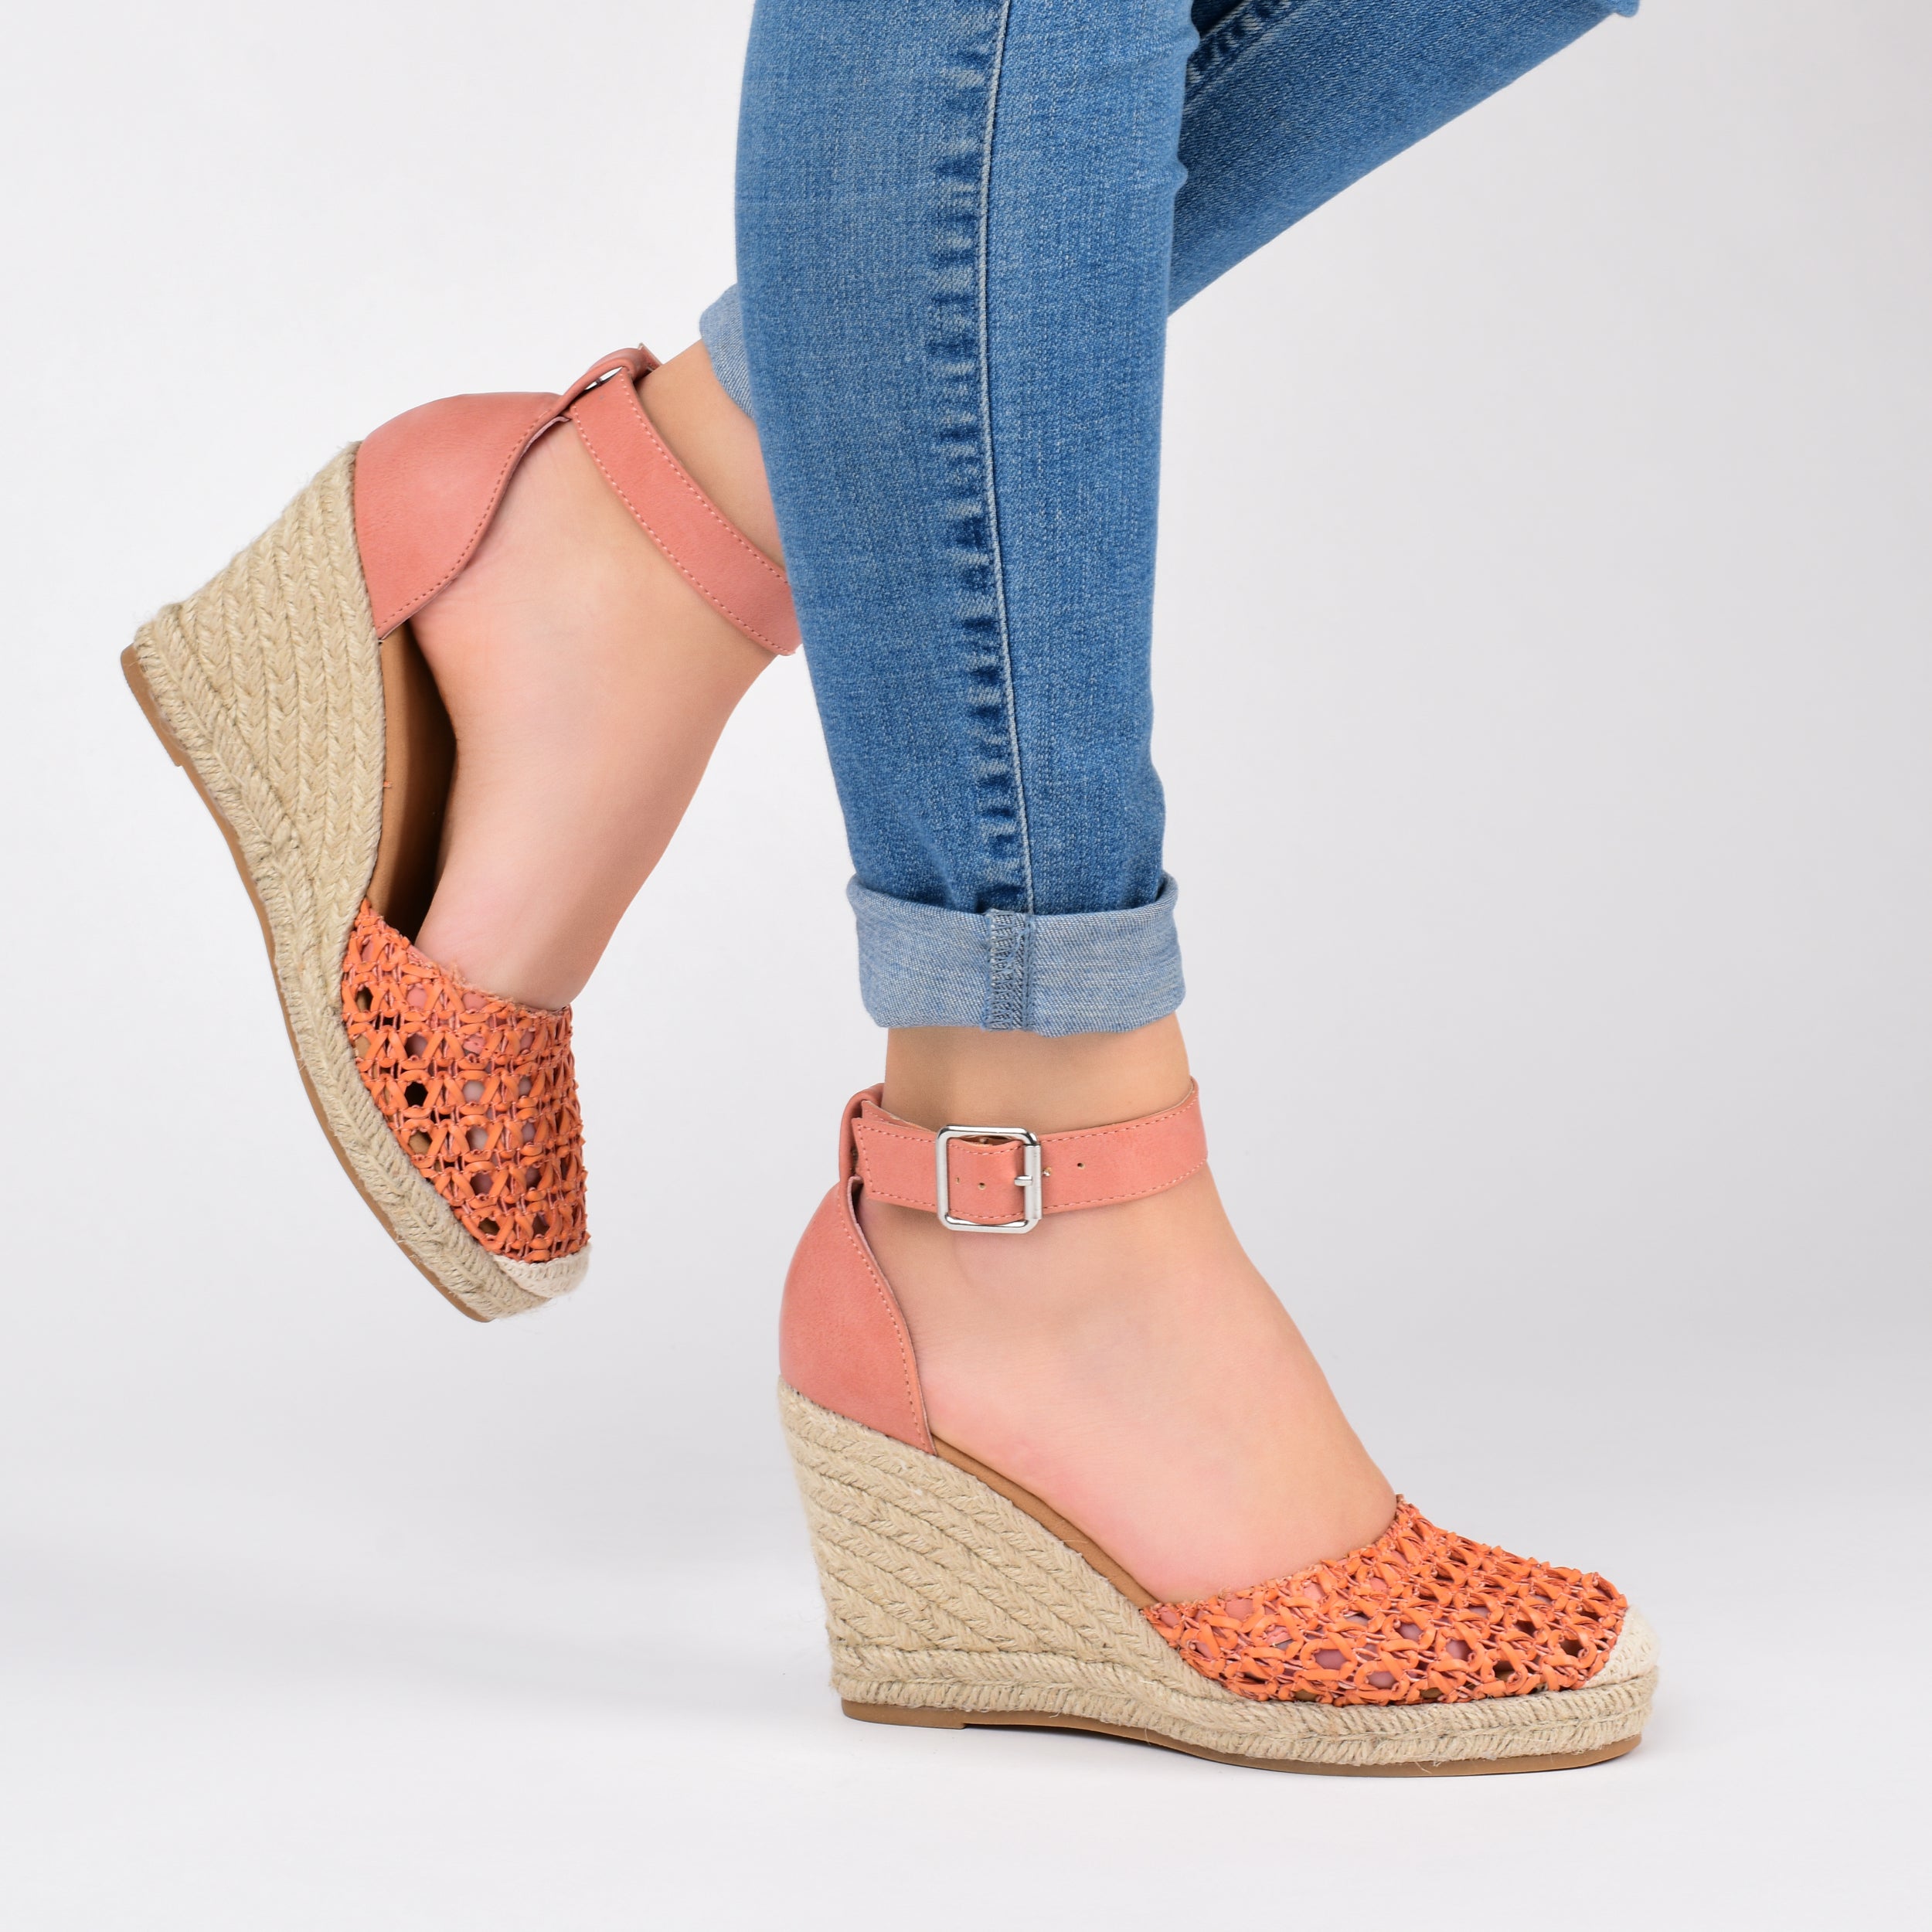 How To Style Fashionable Espadrilles Wedges Outfits in 6 Different Ways -  MY CHIC OBSESSION